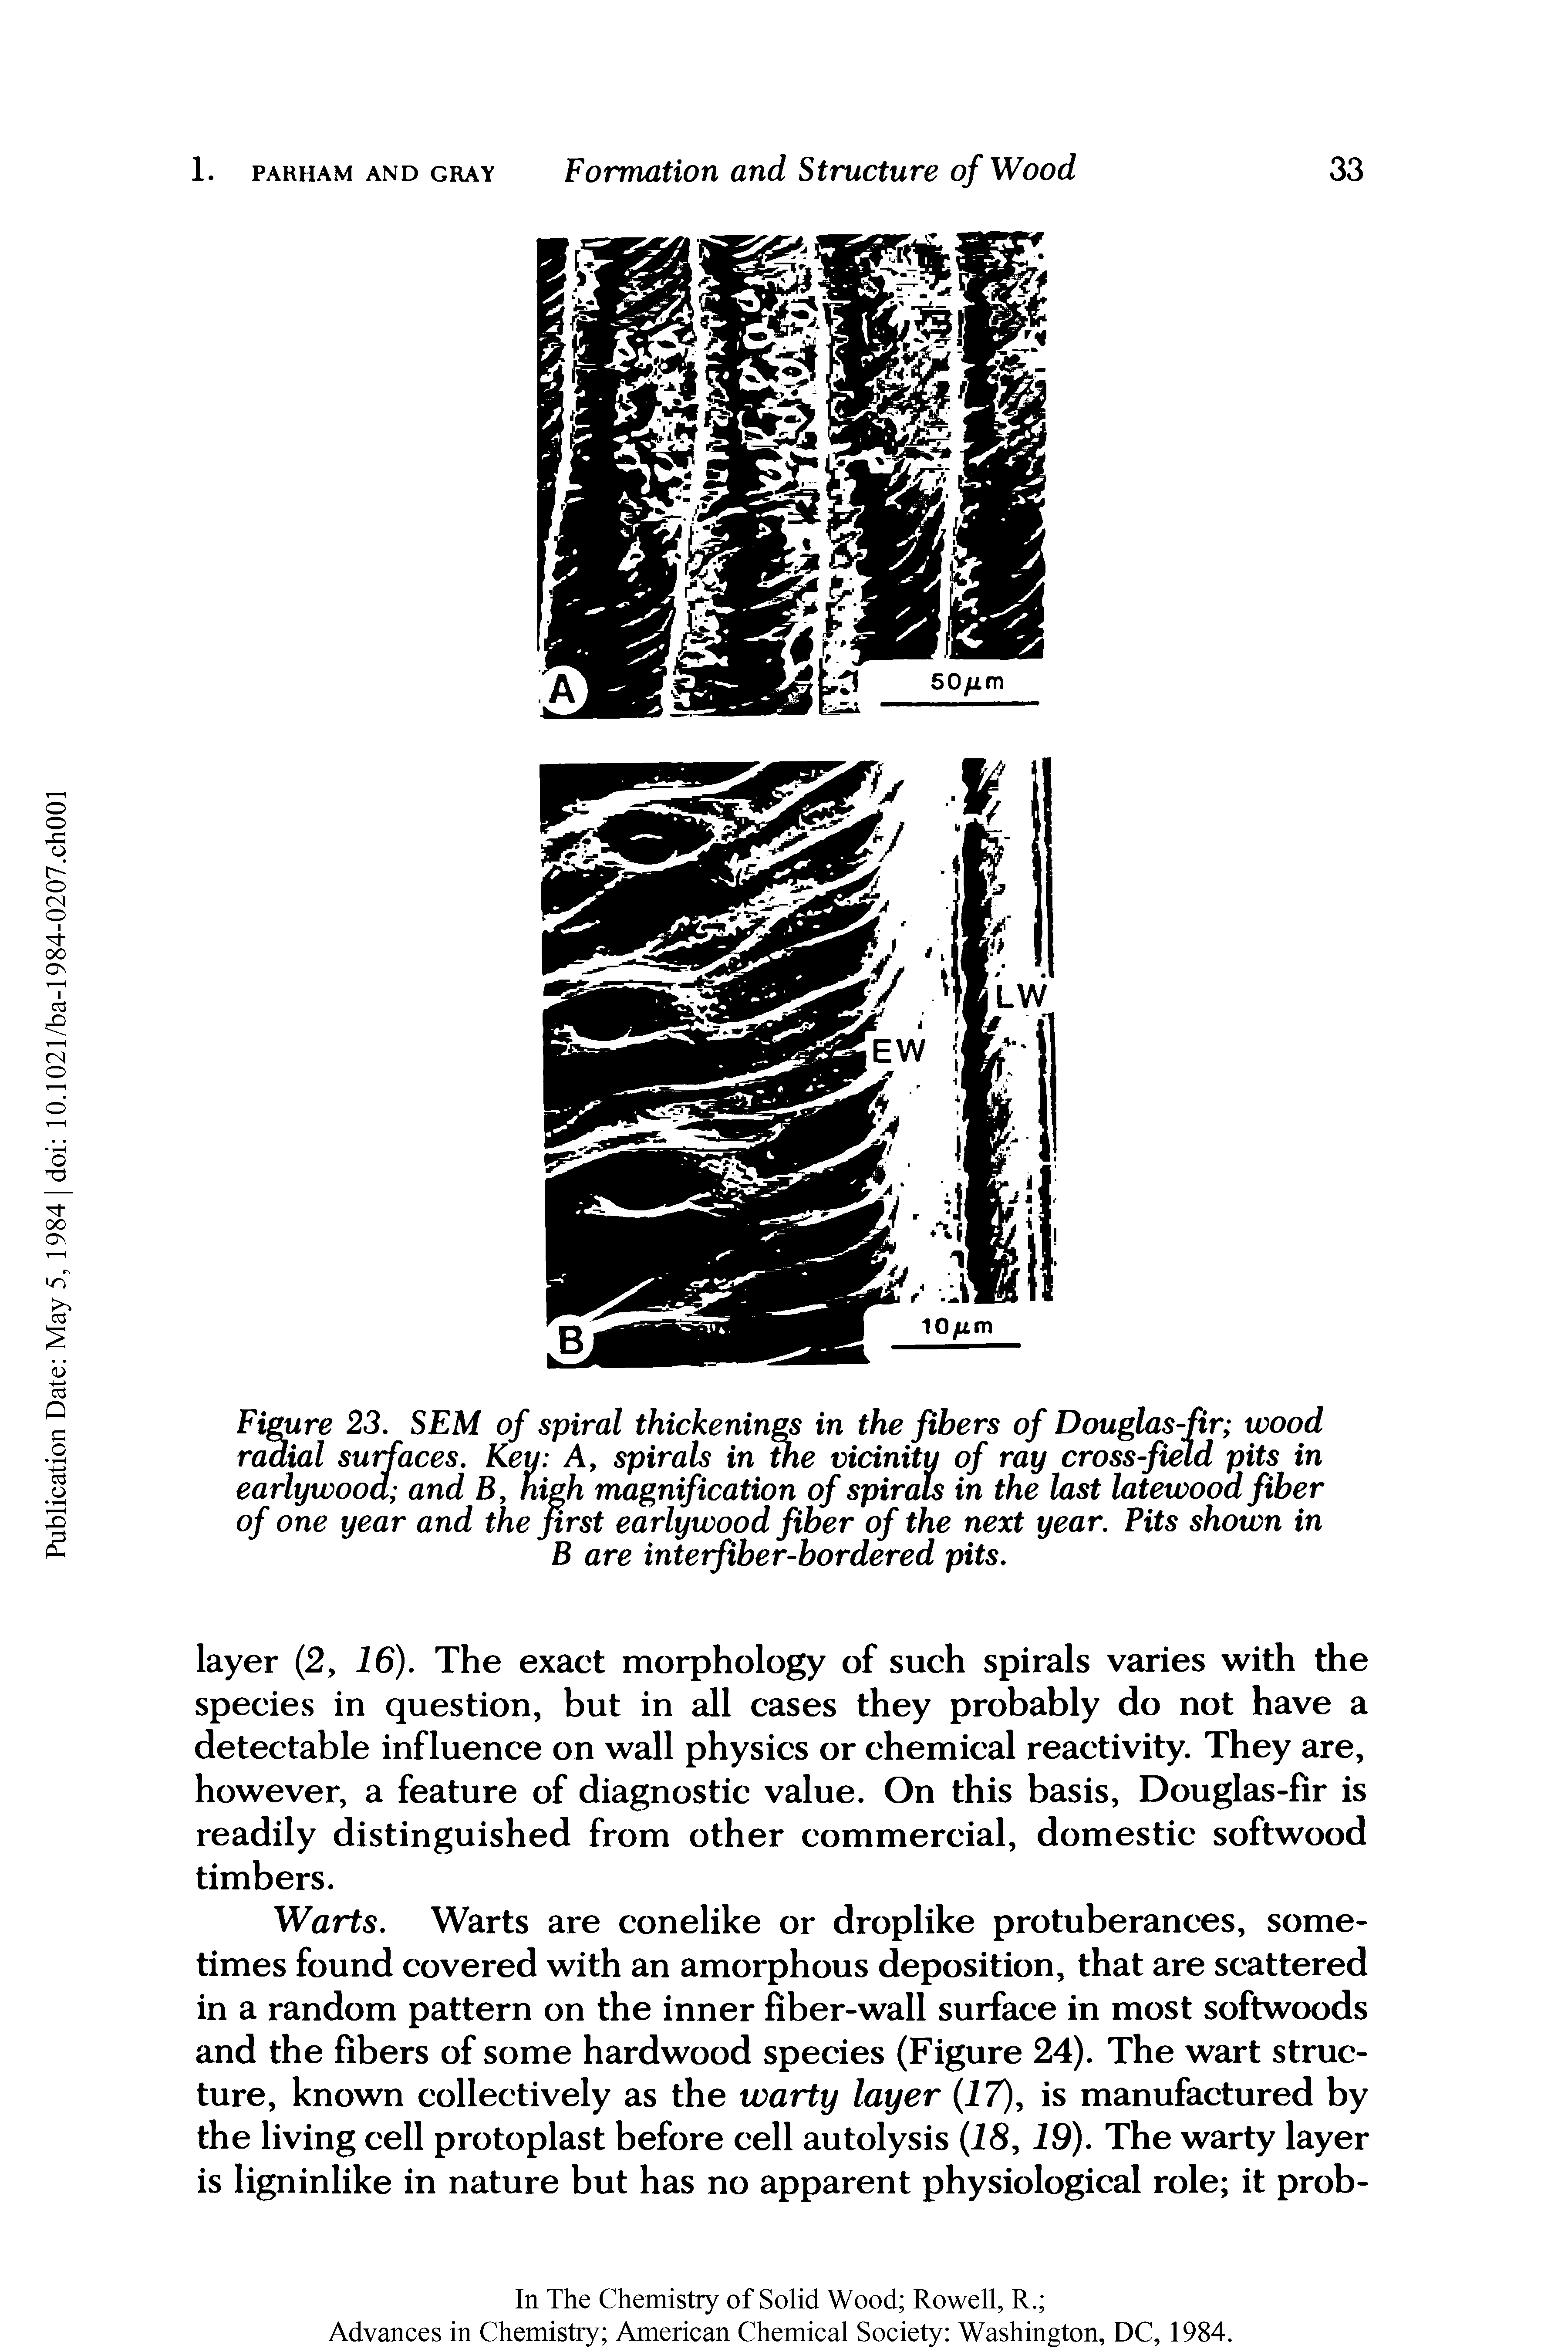 Figure 23. SEM of spiral thickenings in the fibers of Douglas-fir wood radial surfaces. Key A, spirals in the vicinity of ray cross-field pits in early wood and B, nigh magnification of spirals in the last latewood fiber of one year and the first earlywood fiber of the next year. Pits shown in B are interfiber-bordered pits.